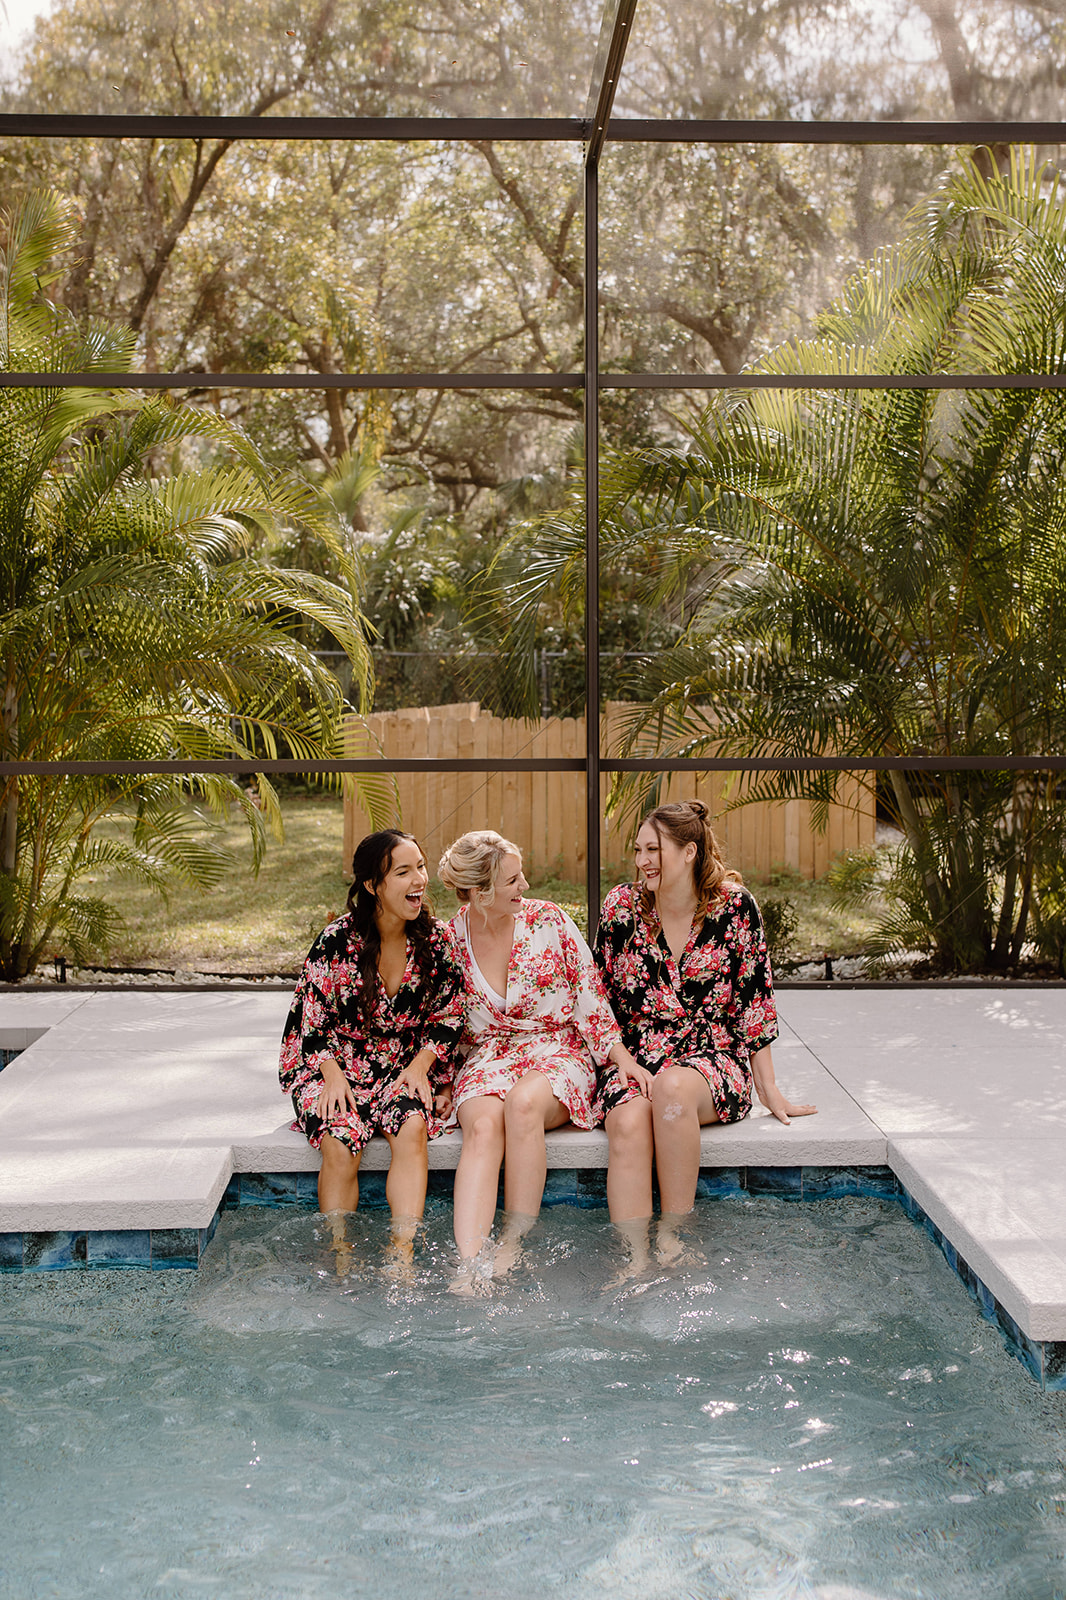 Bride and bridesmaids laughing in their matching floral robes while splashing water in the pool